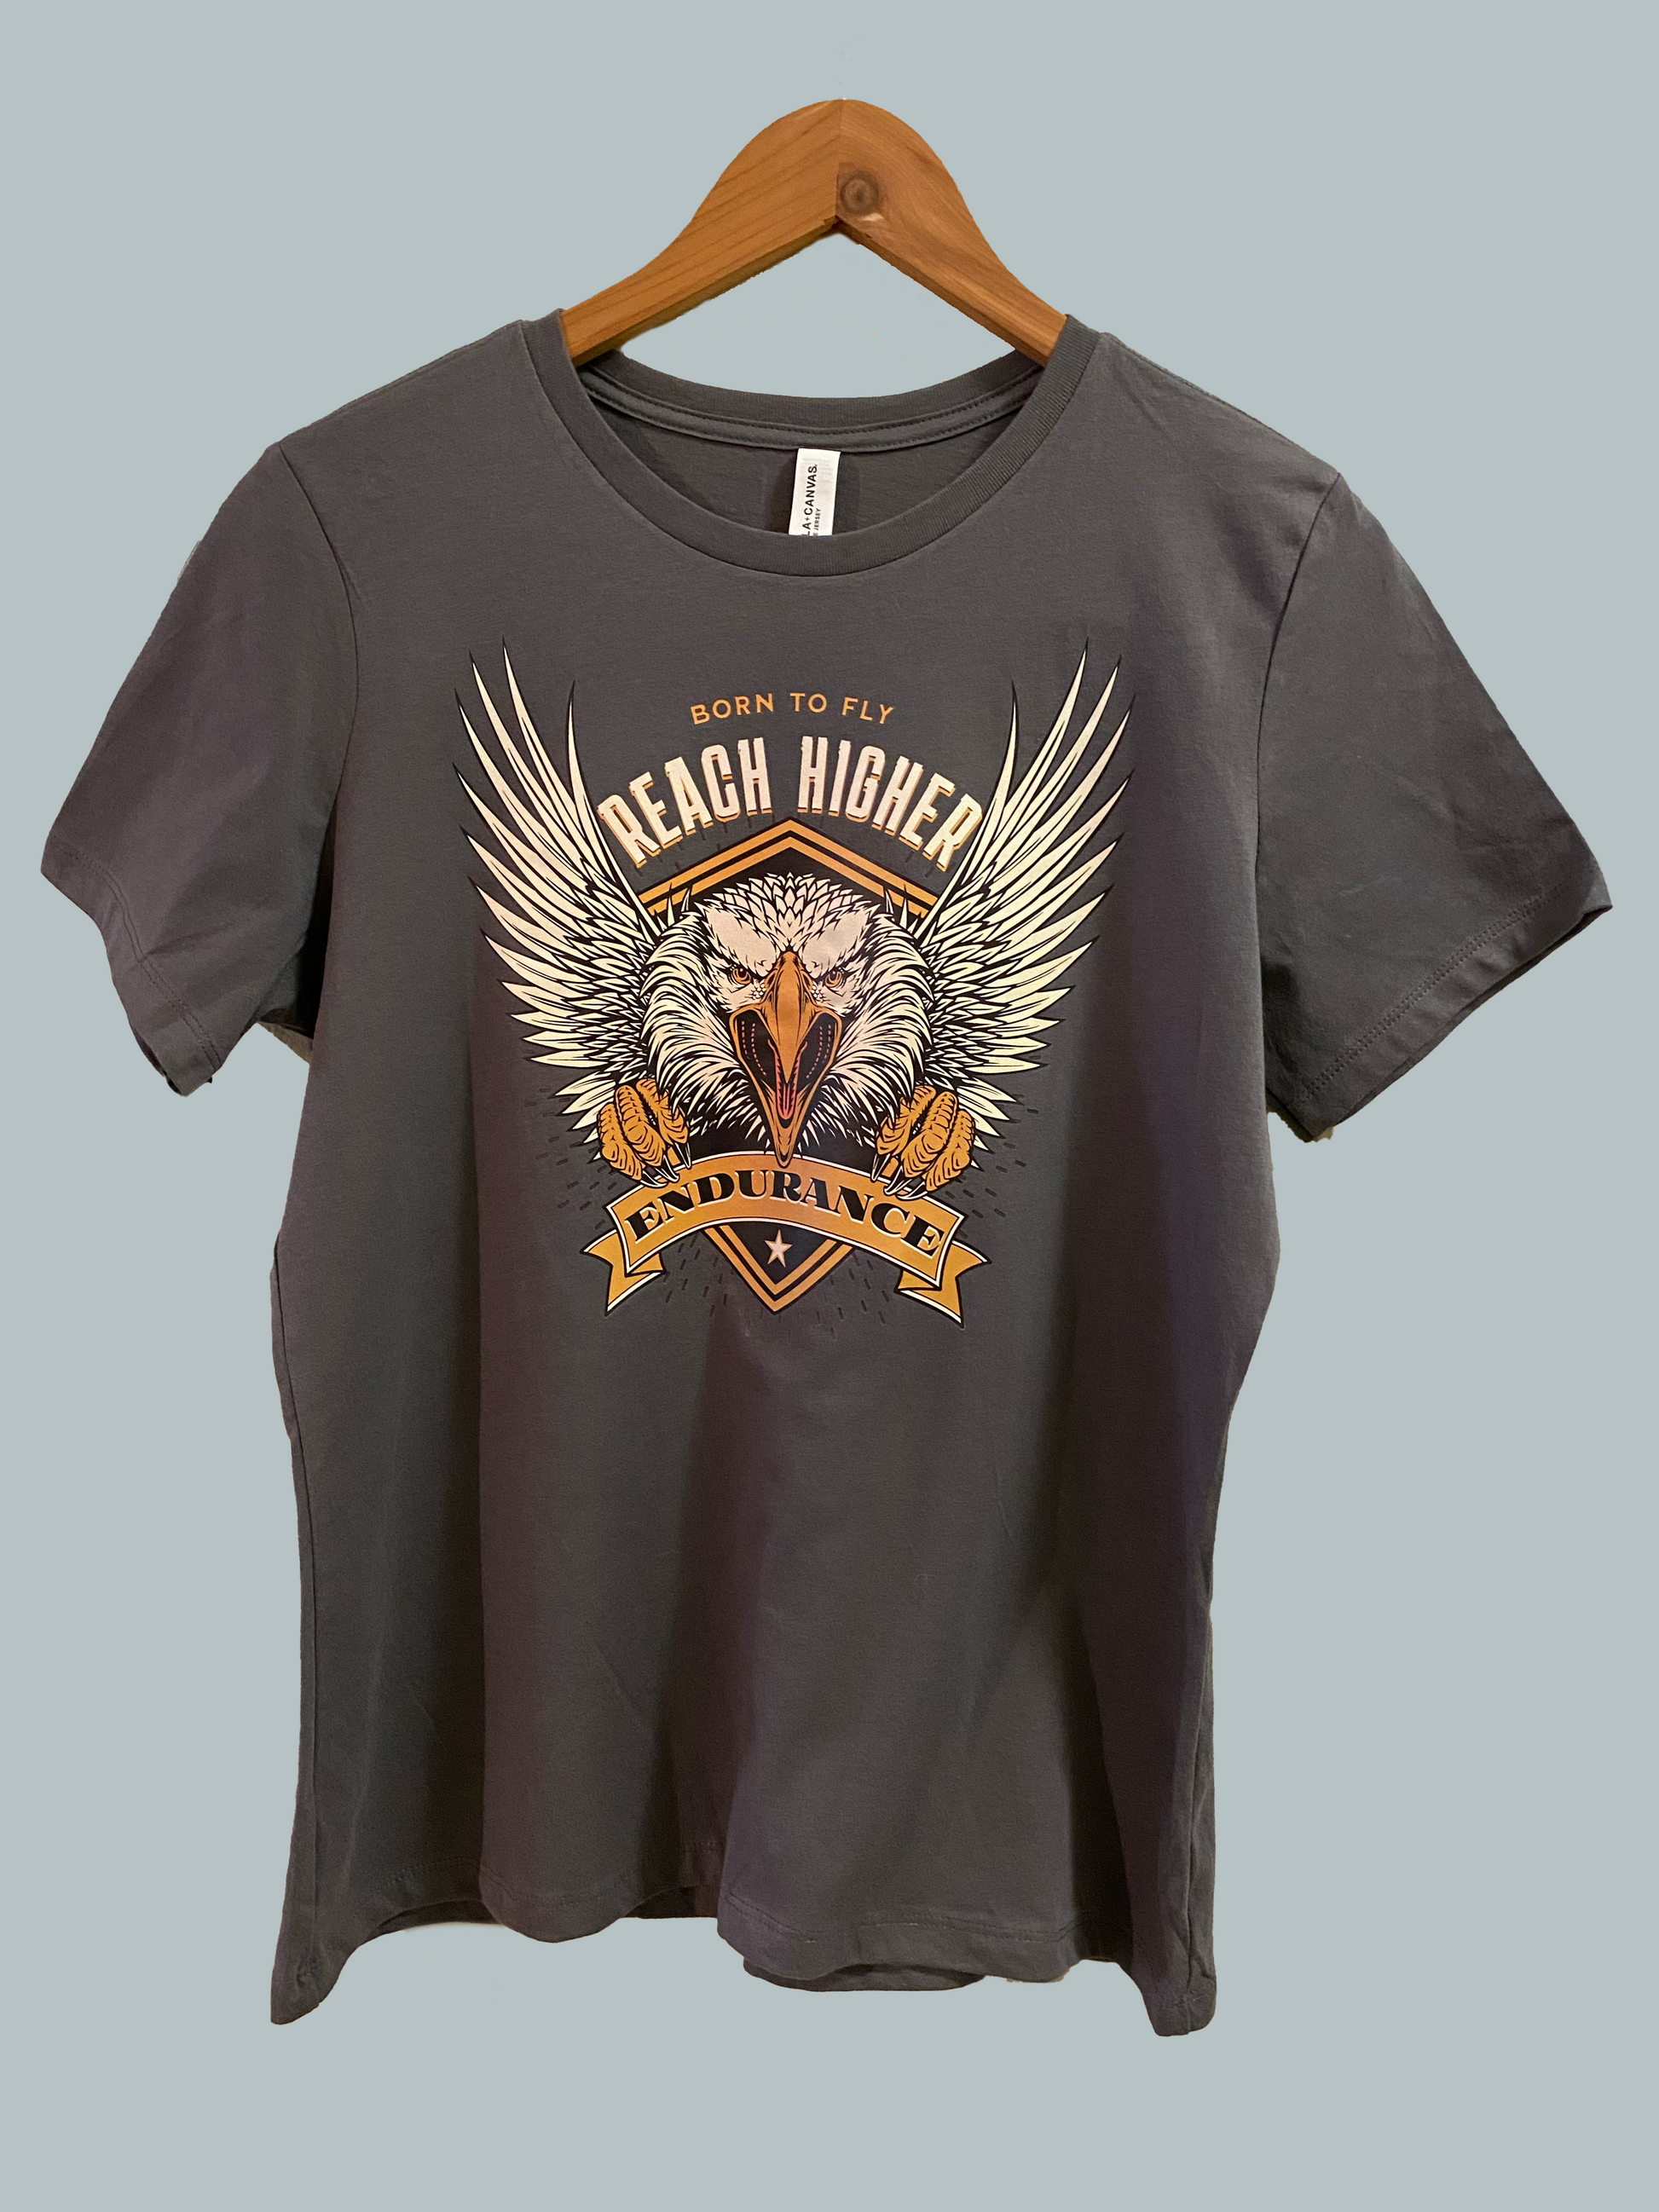 Grey version of Eagle design which reads Born To Fly Reach Higher on the top of the eagle and Endurance below it